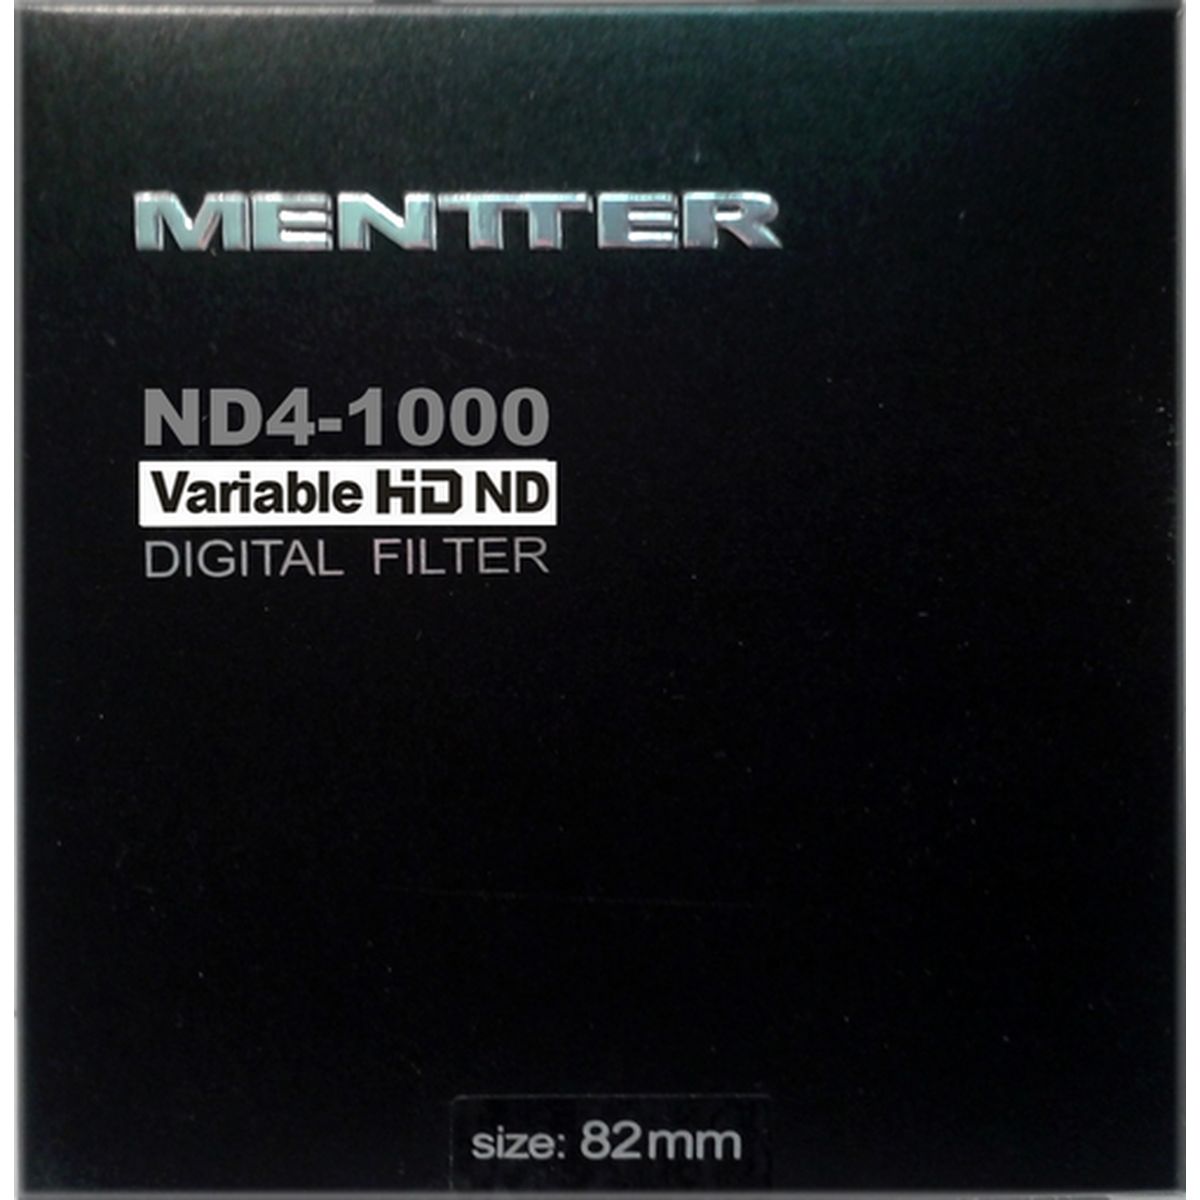 Mentter Variable HD ND4-1000 77mm